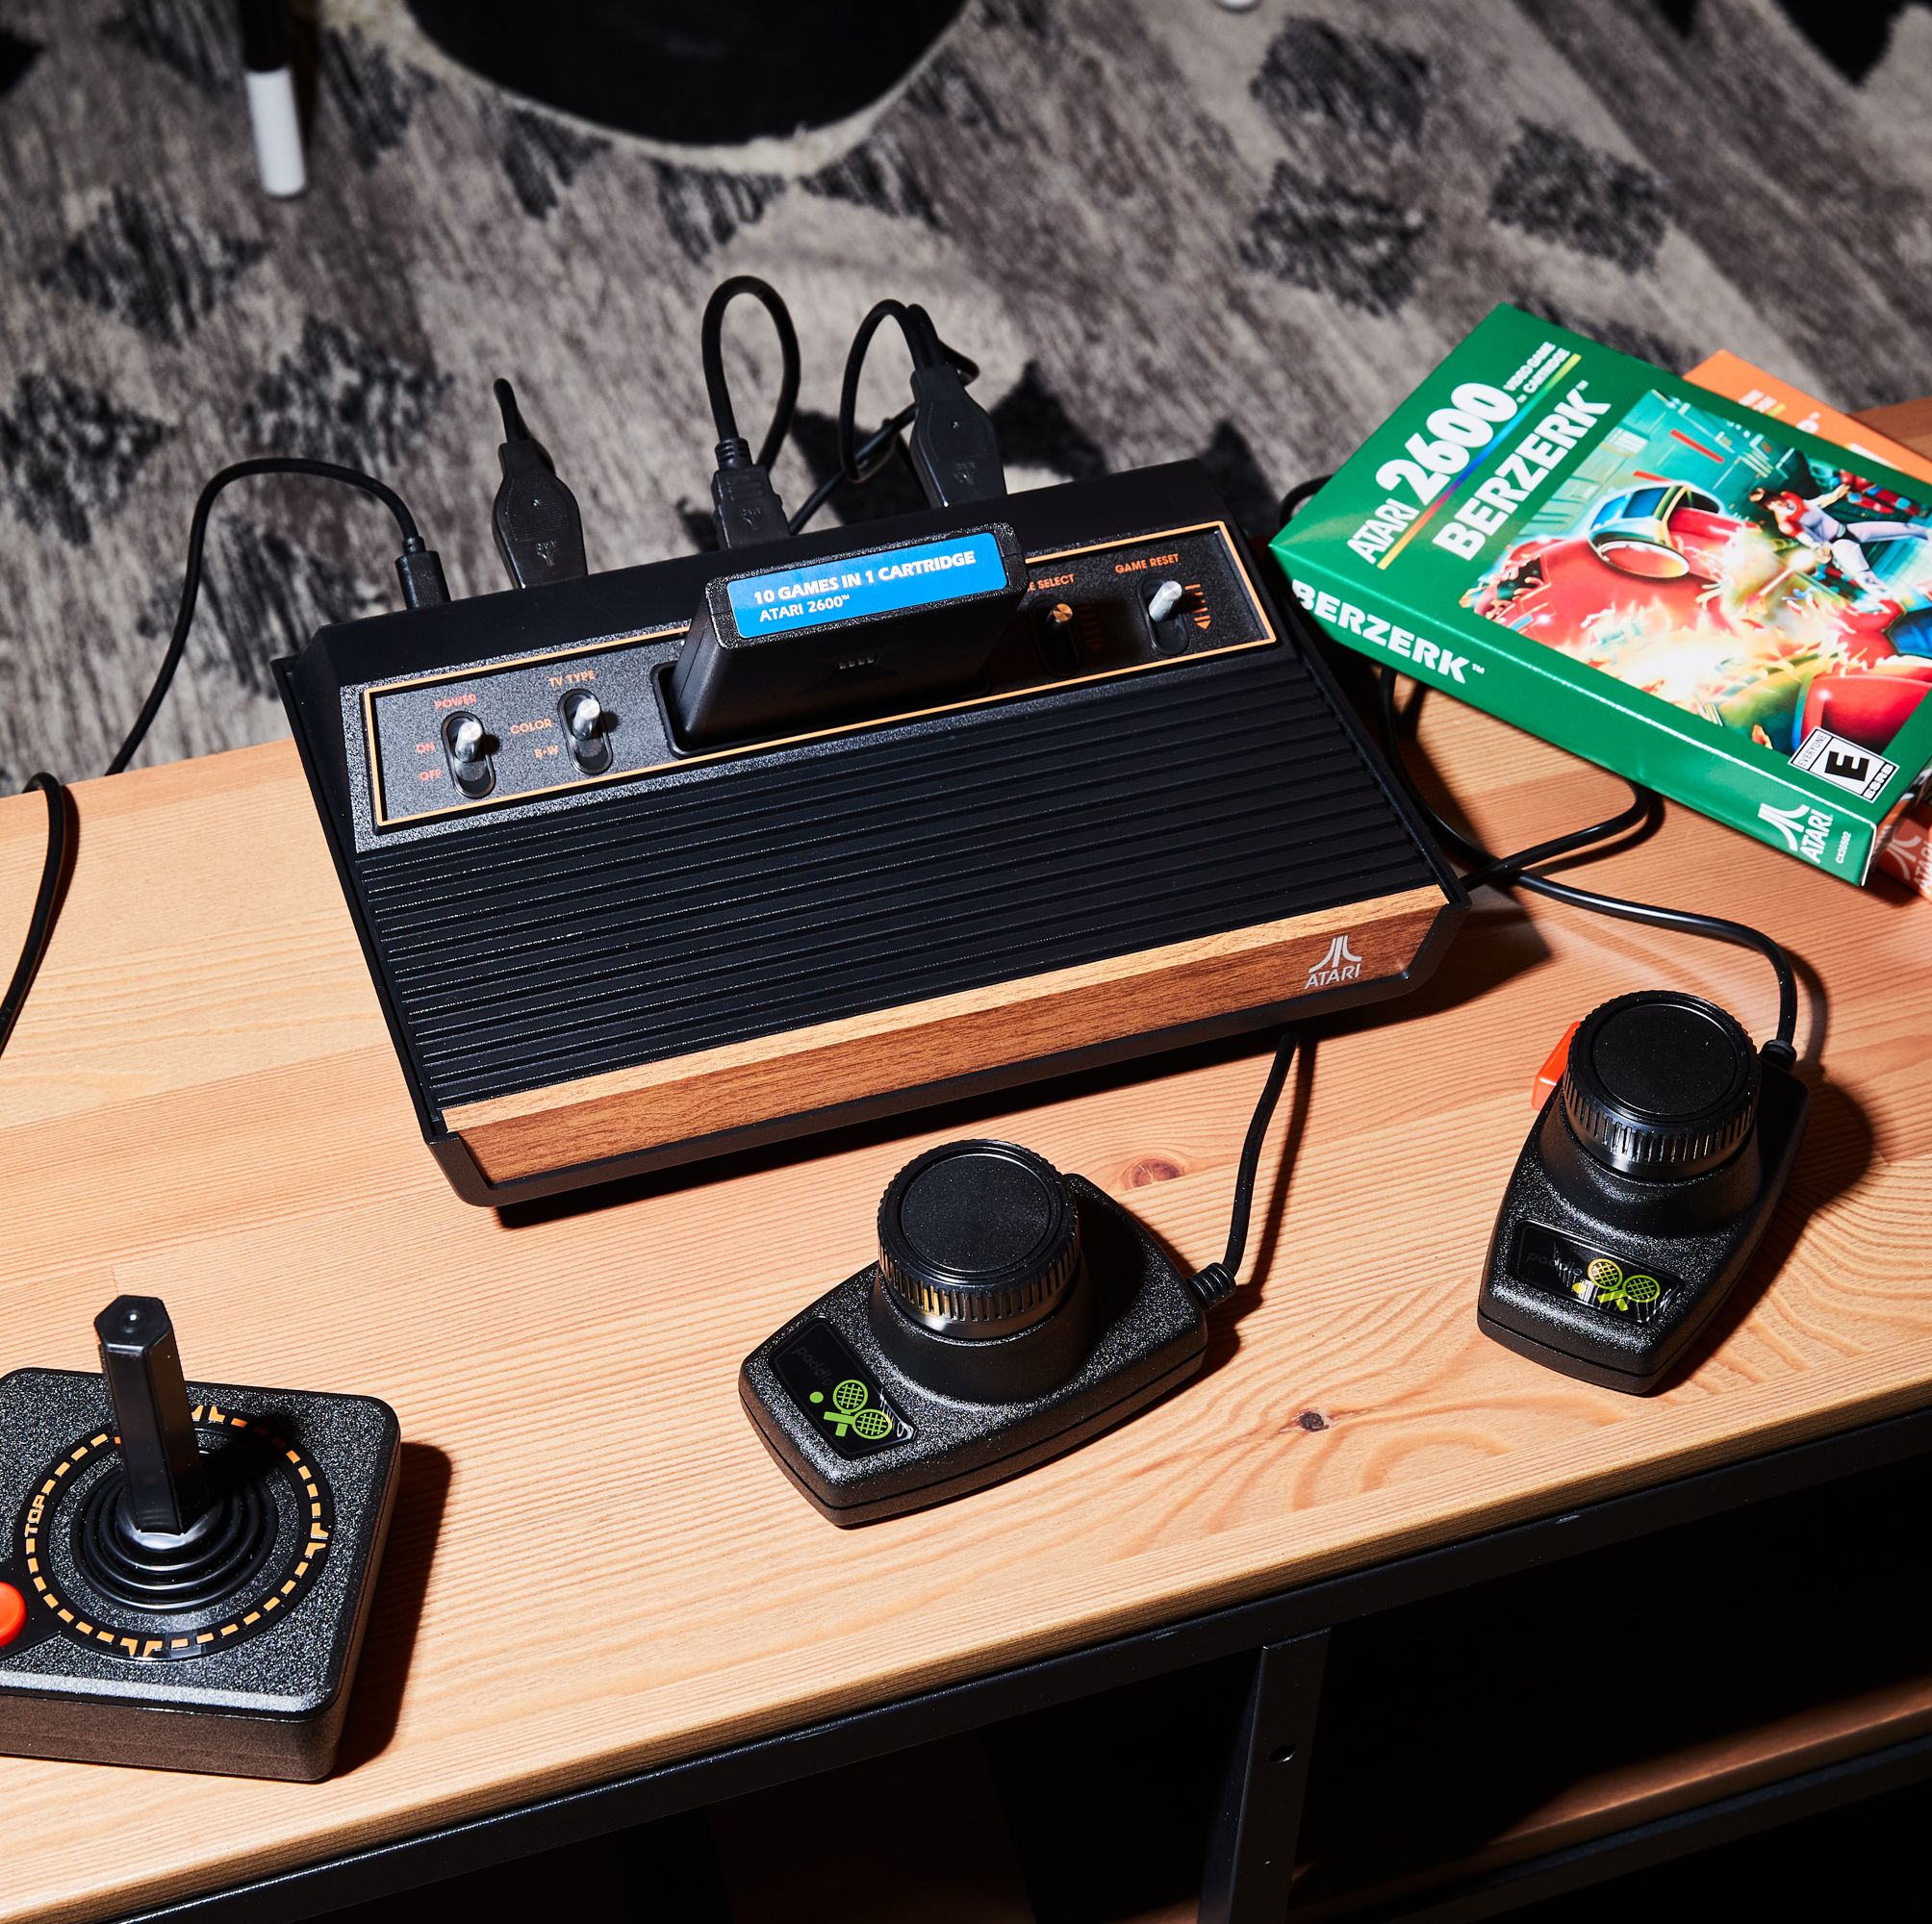 Lose At Video Pinball Again (and Again) With the New Atari 2600+ Mini-Console